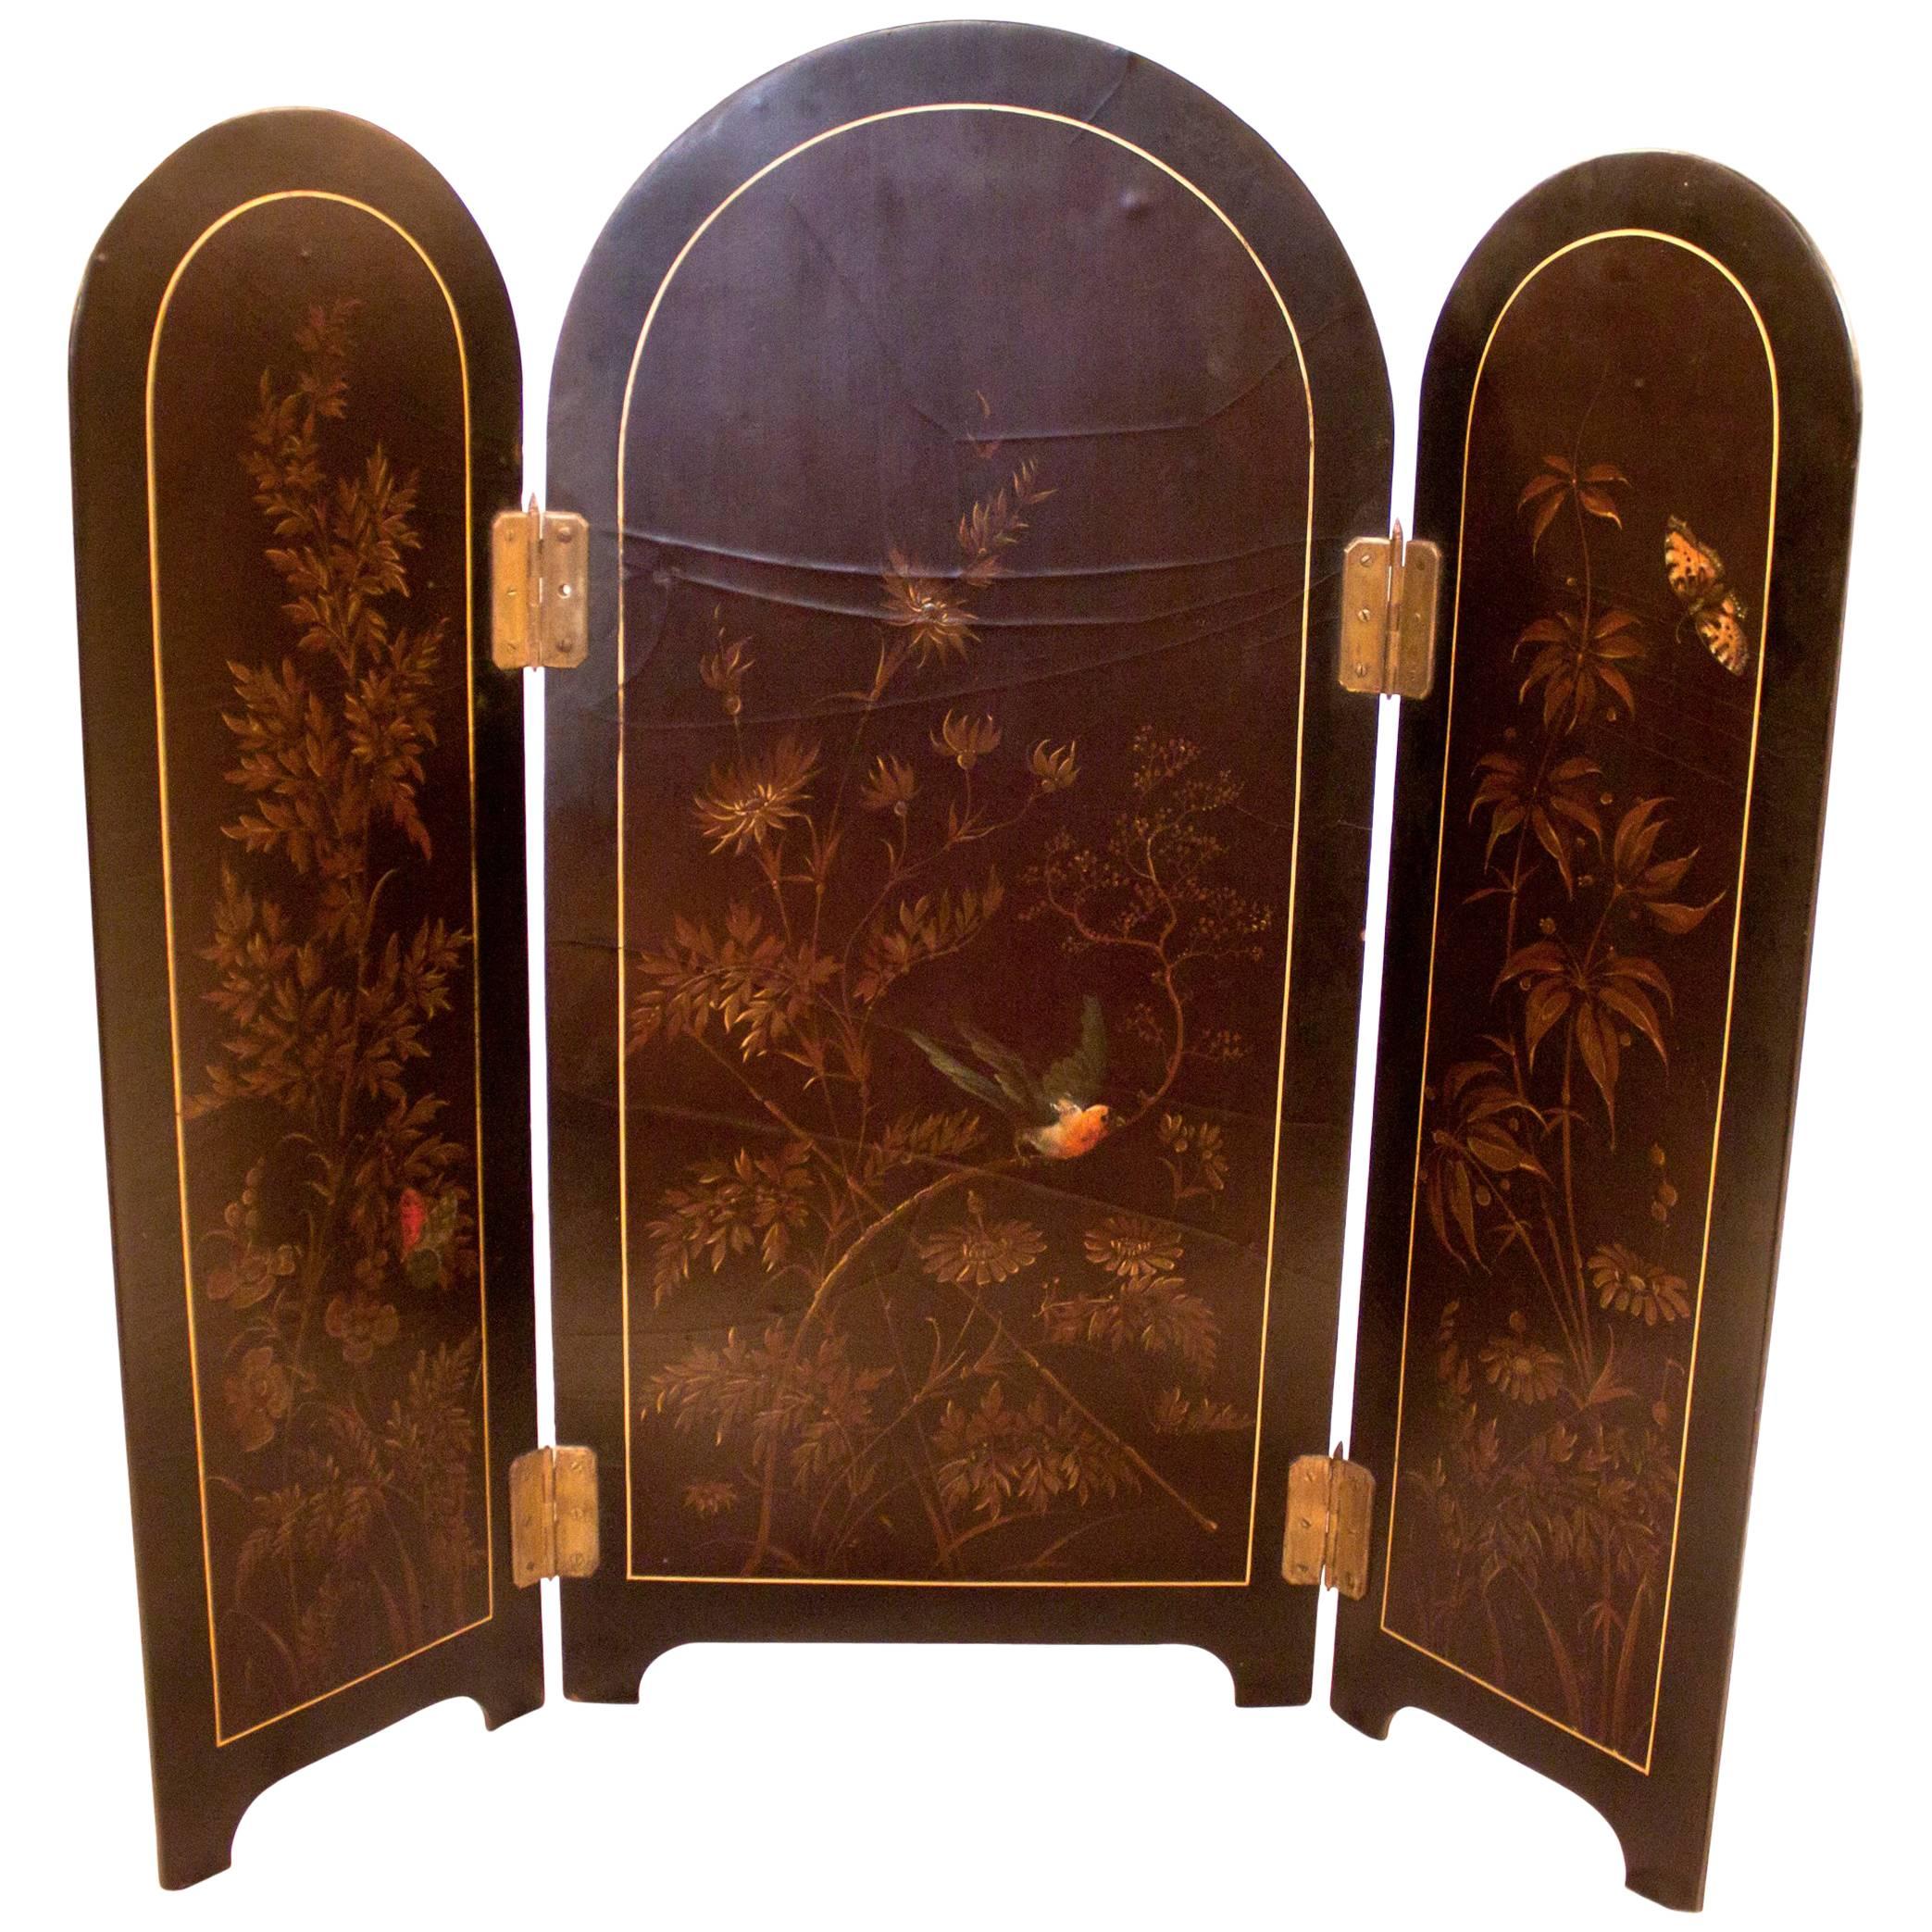 19th century Papier Mache Table Top Hinged Screen Butterfly and Bird Motif For Sale